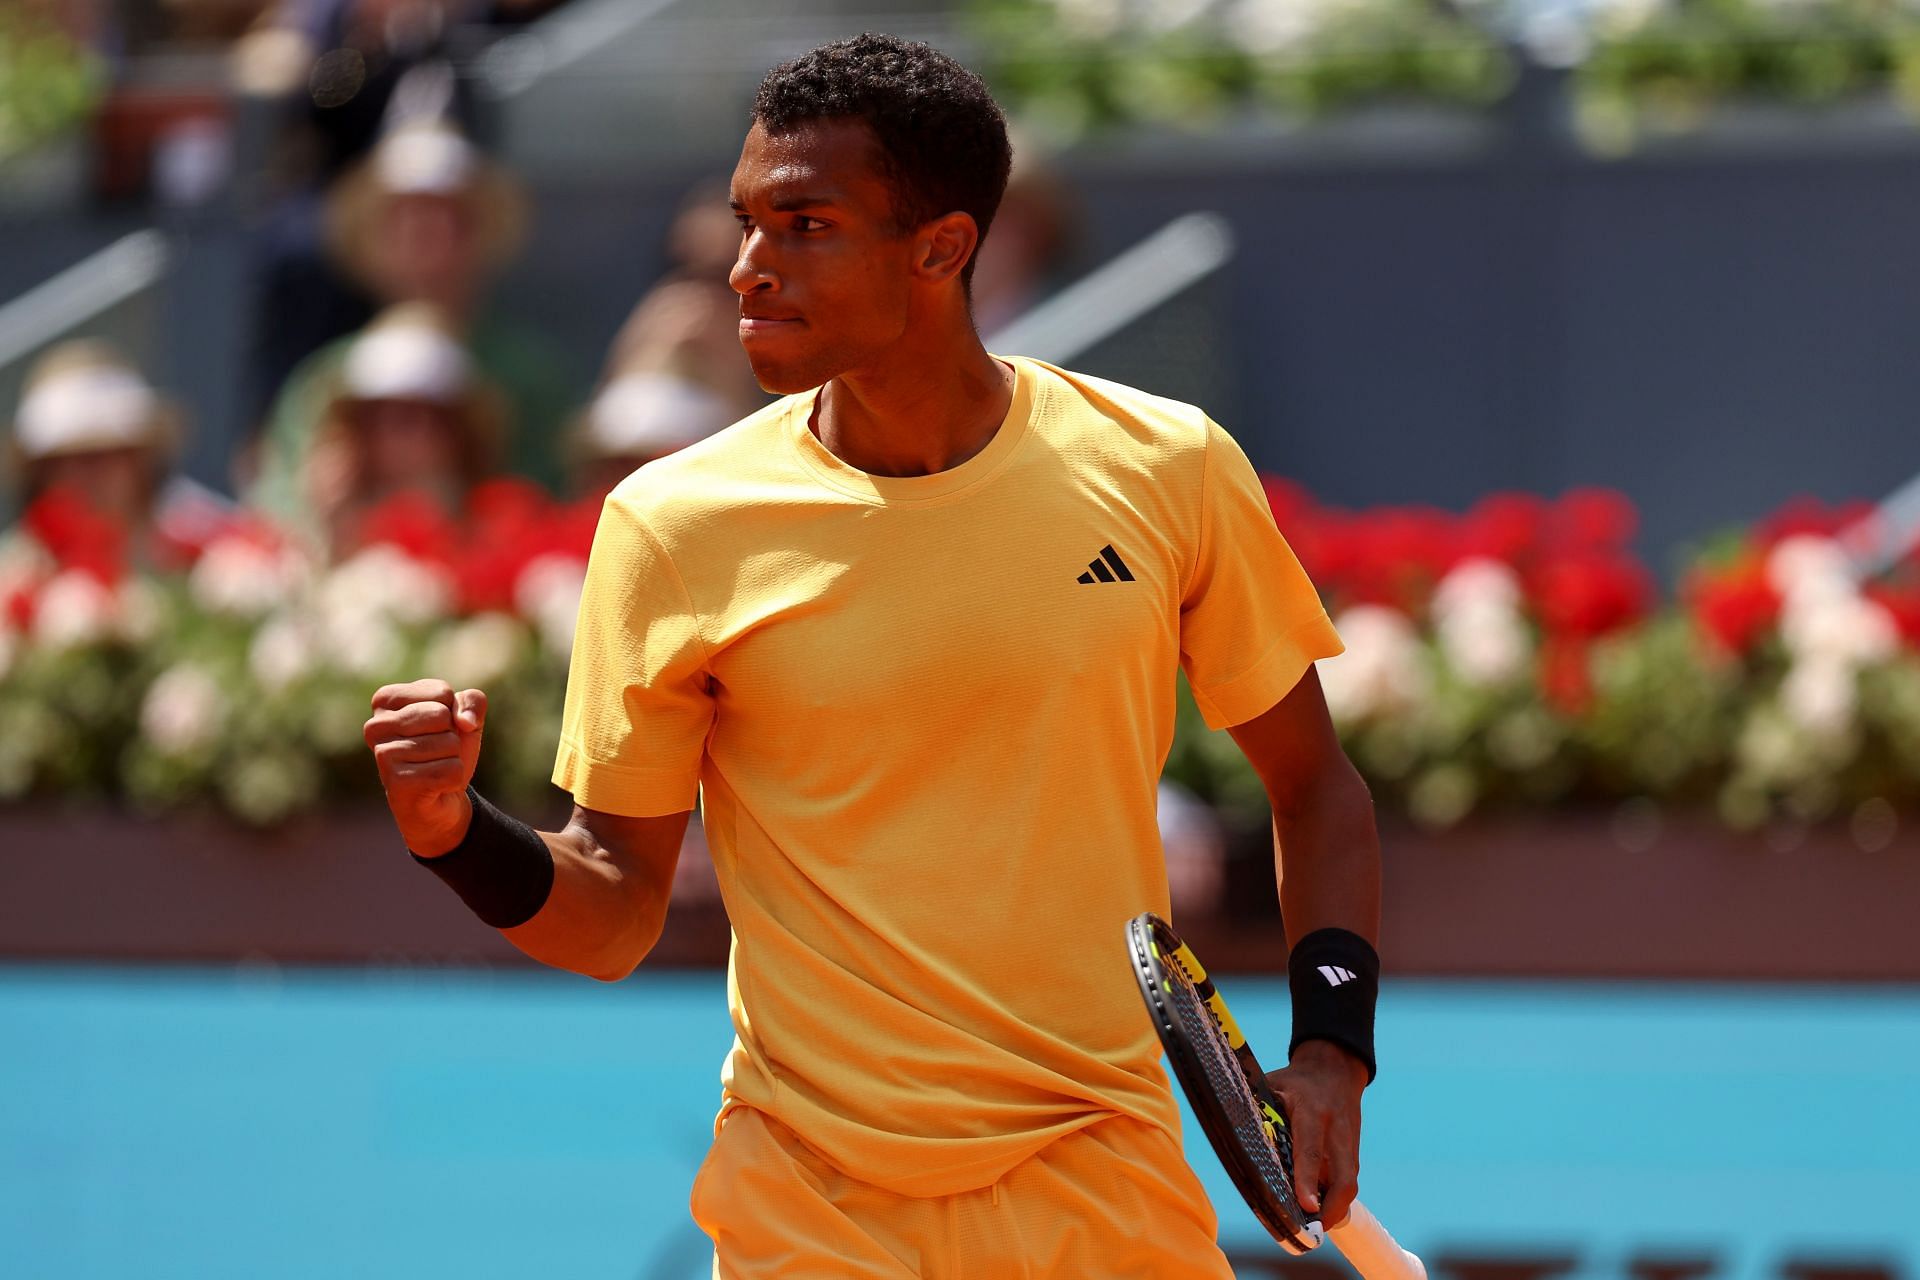 Auger-Aliassime at the Mutua Madrid Open - Day Three